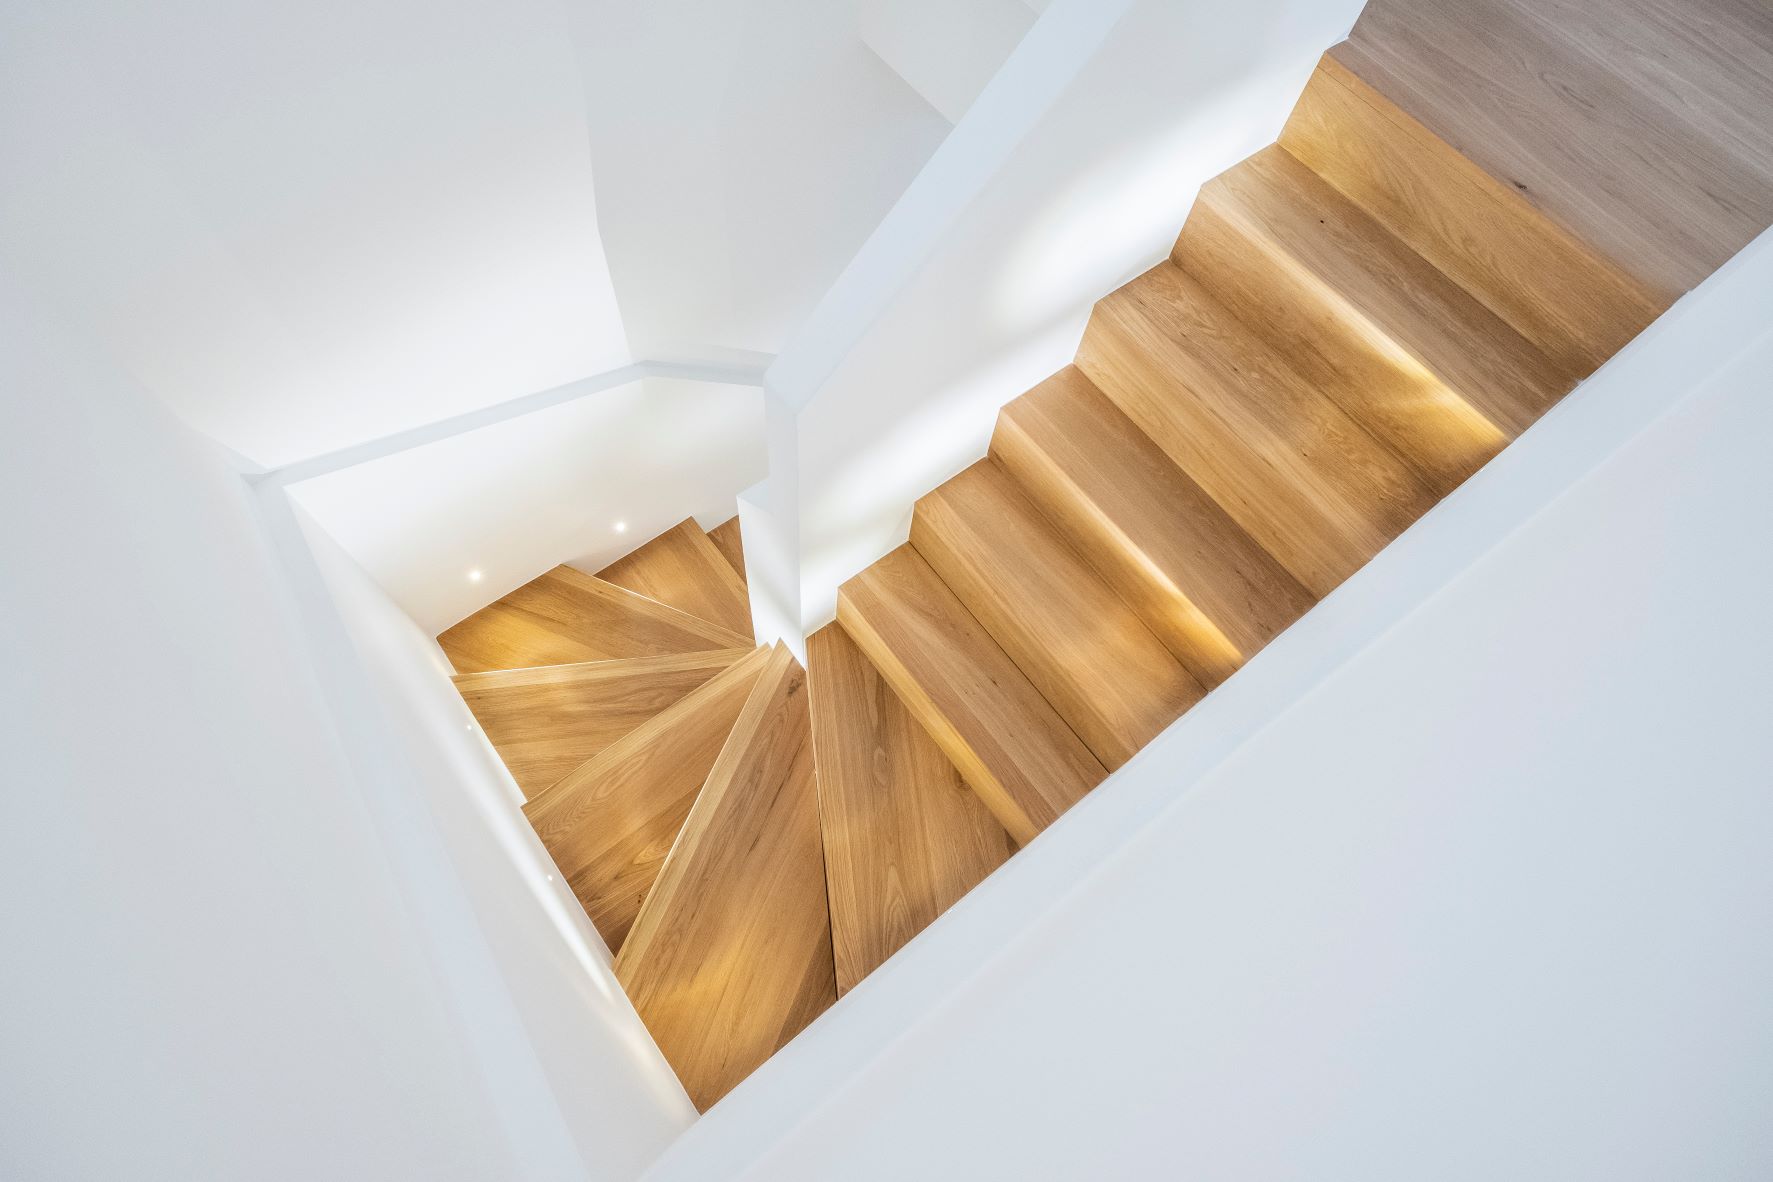 Stair lighting: make more out of something ordinary